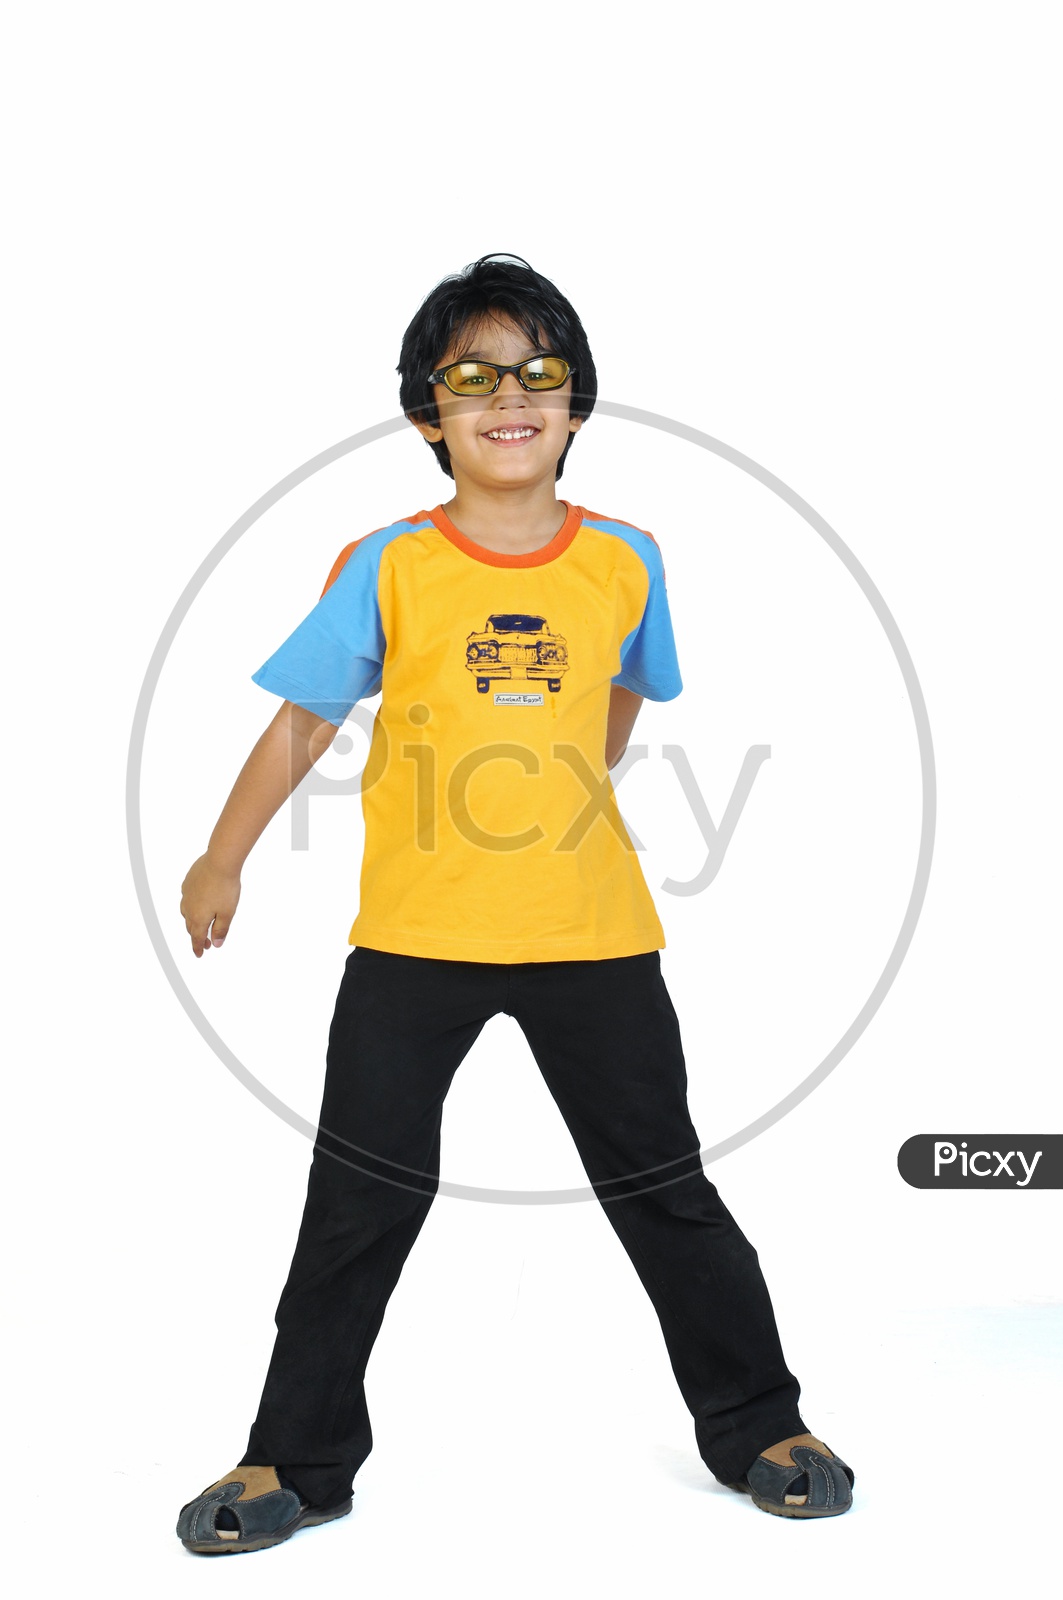 An Indian boy dancing in white background